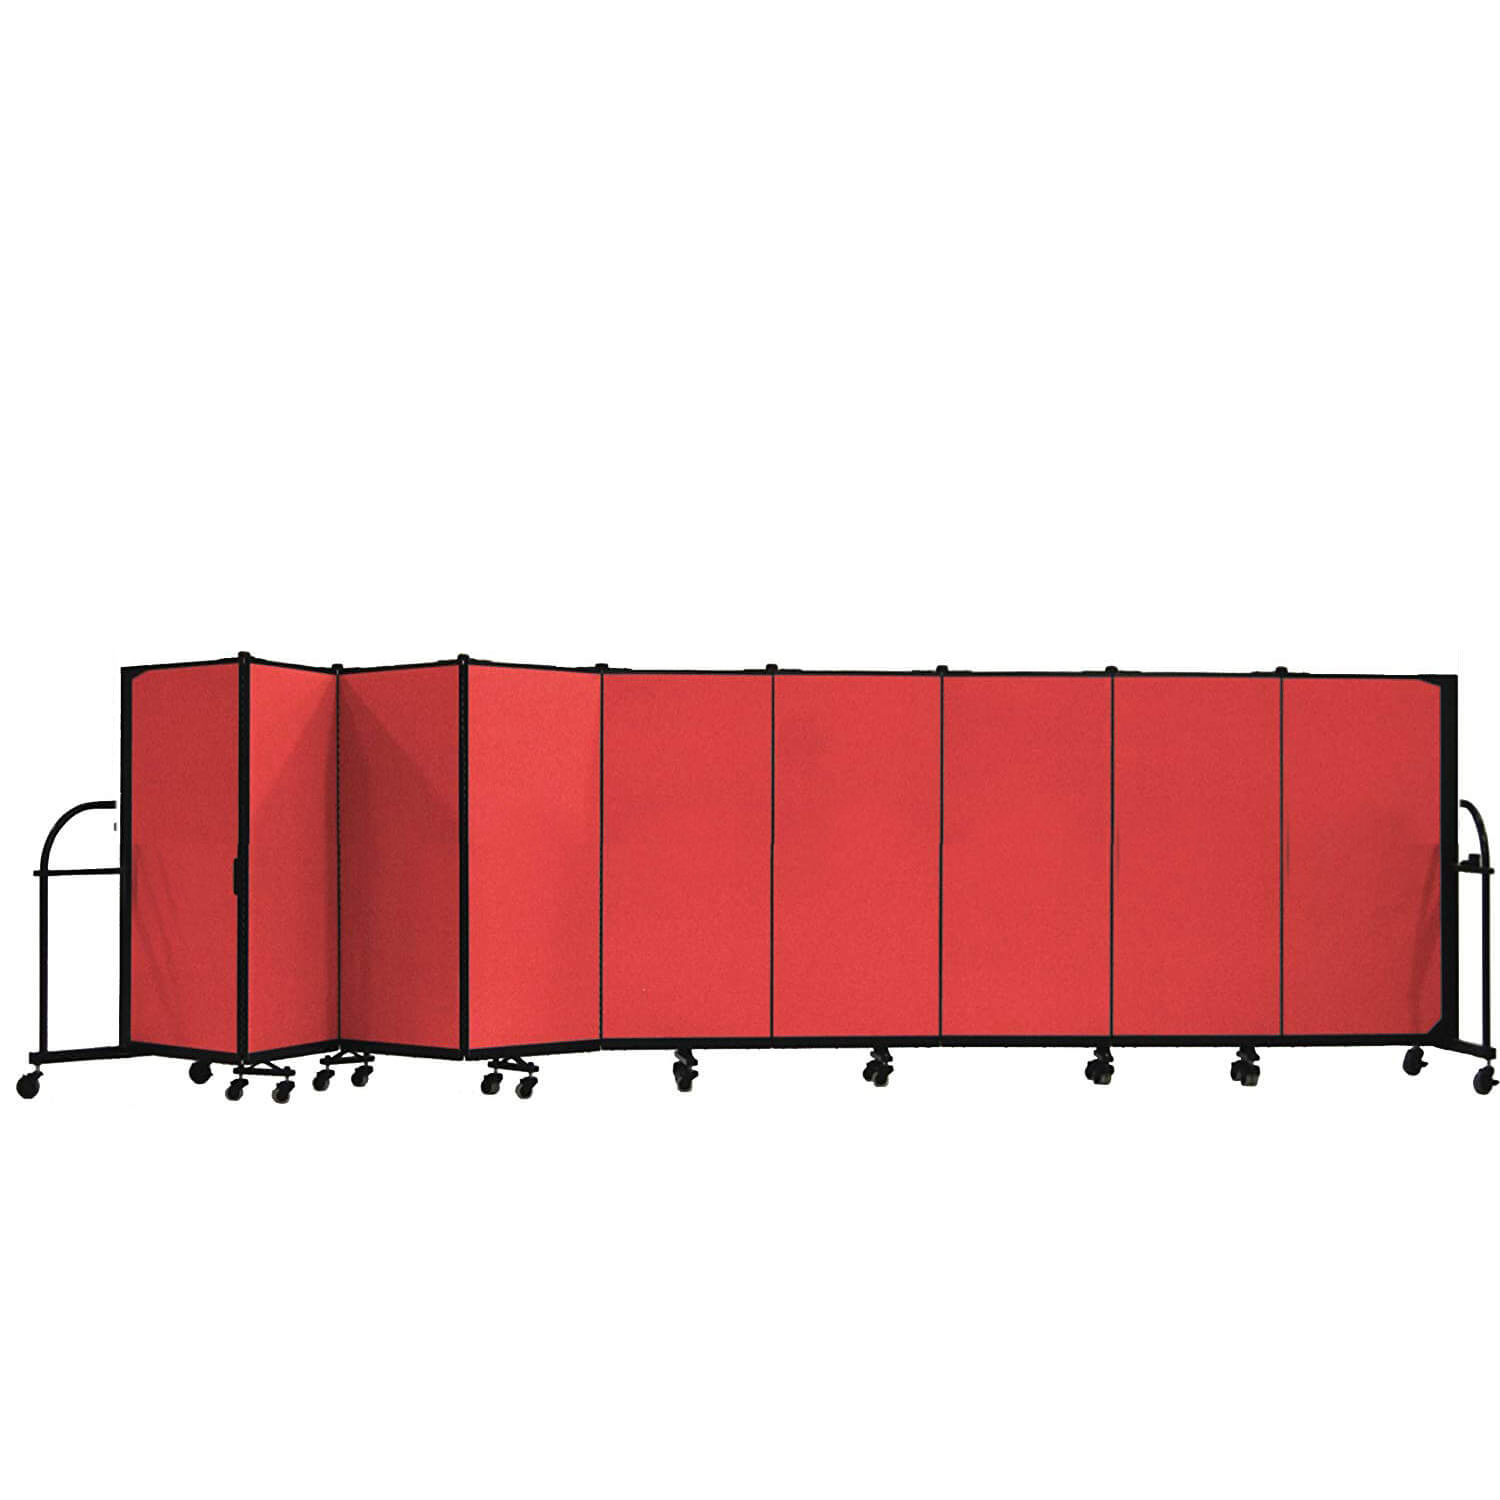 Portable room dividers screen dividers for rooms 1